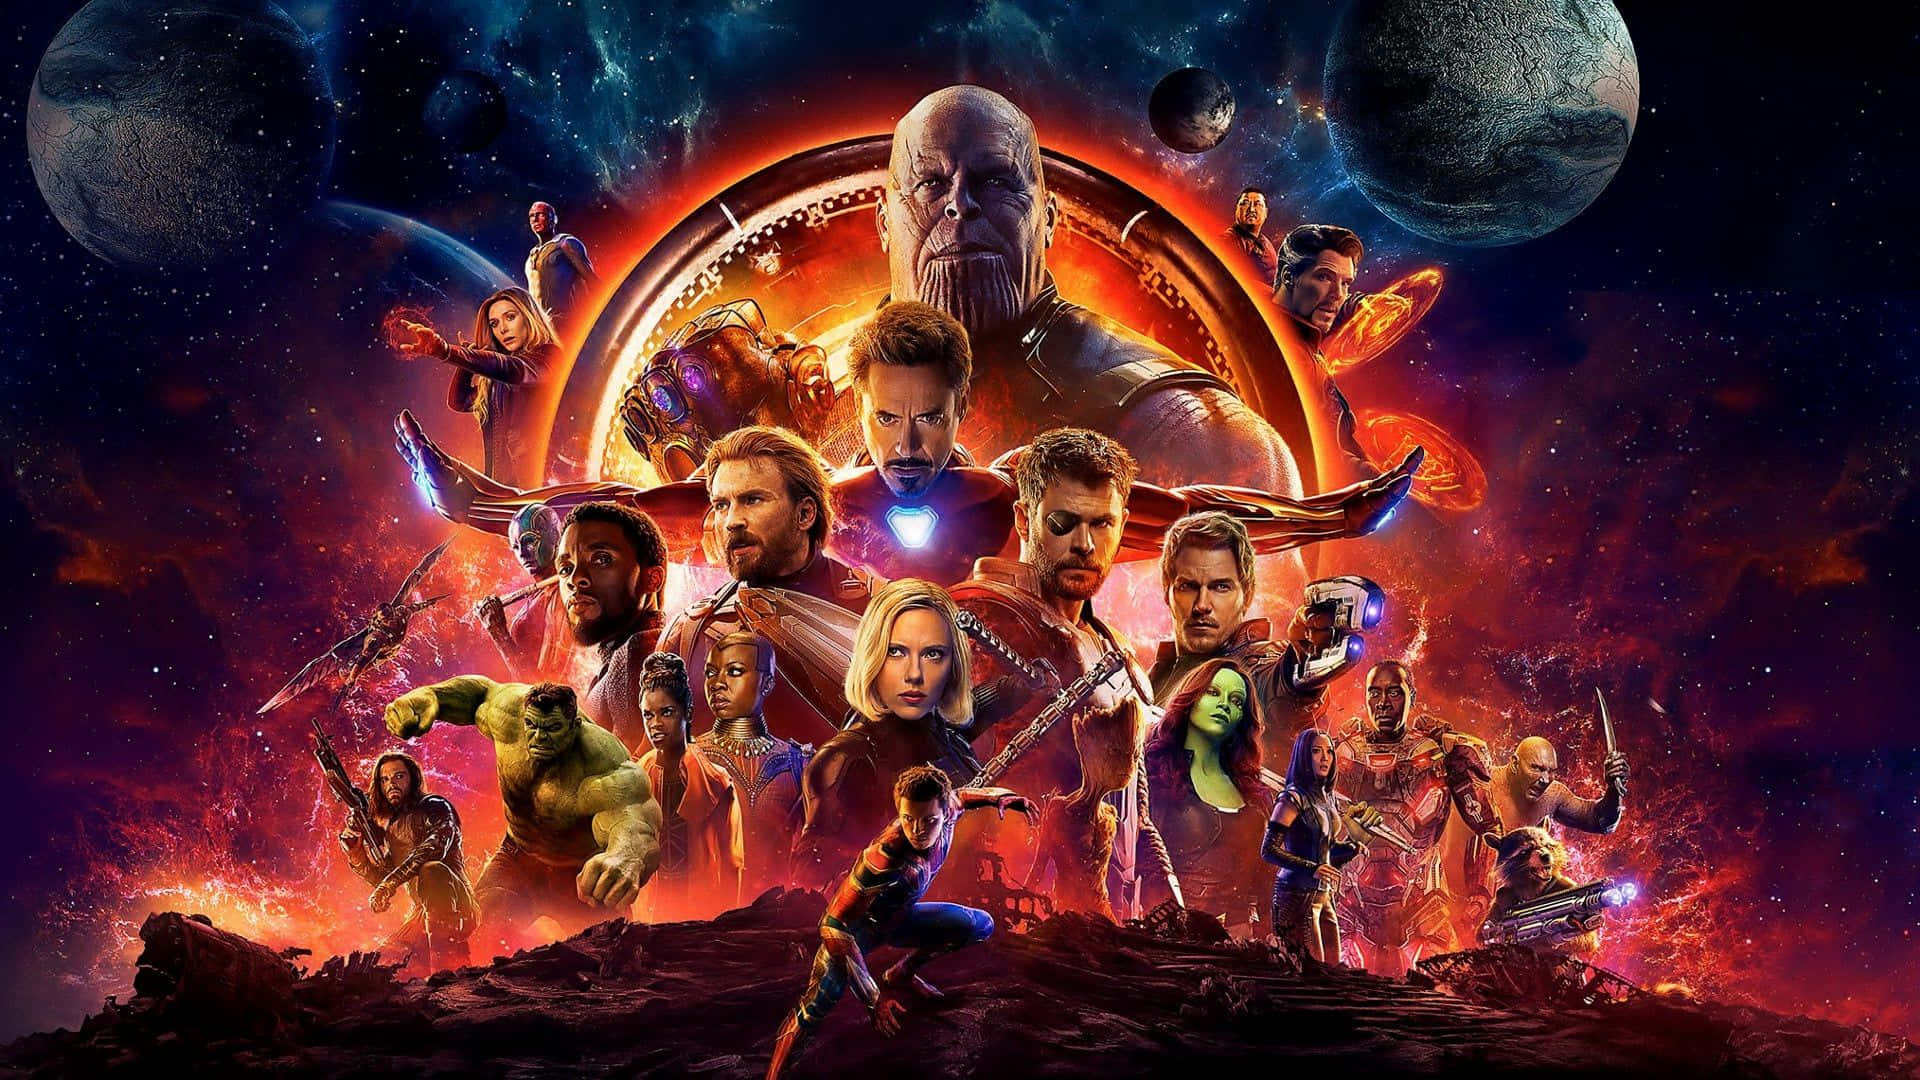 The entire Avengers cast united against their greatest foe: Thanos.